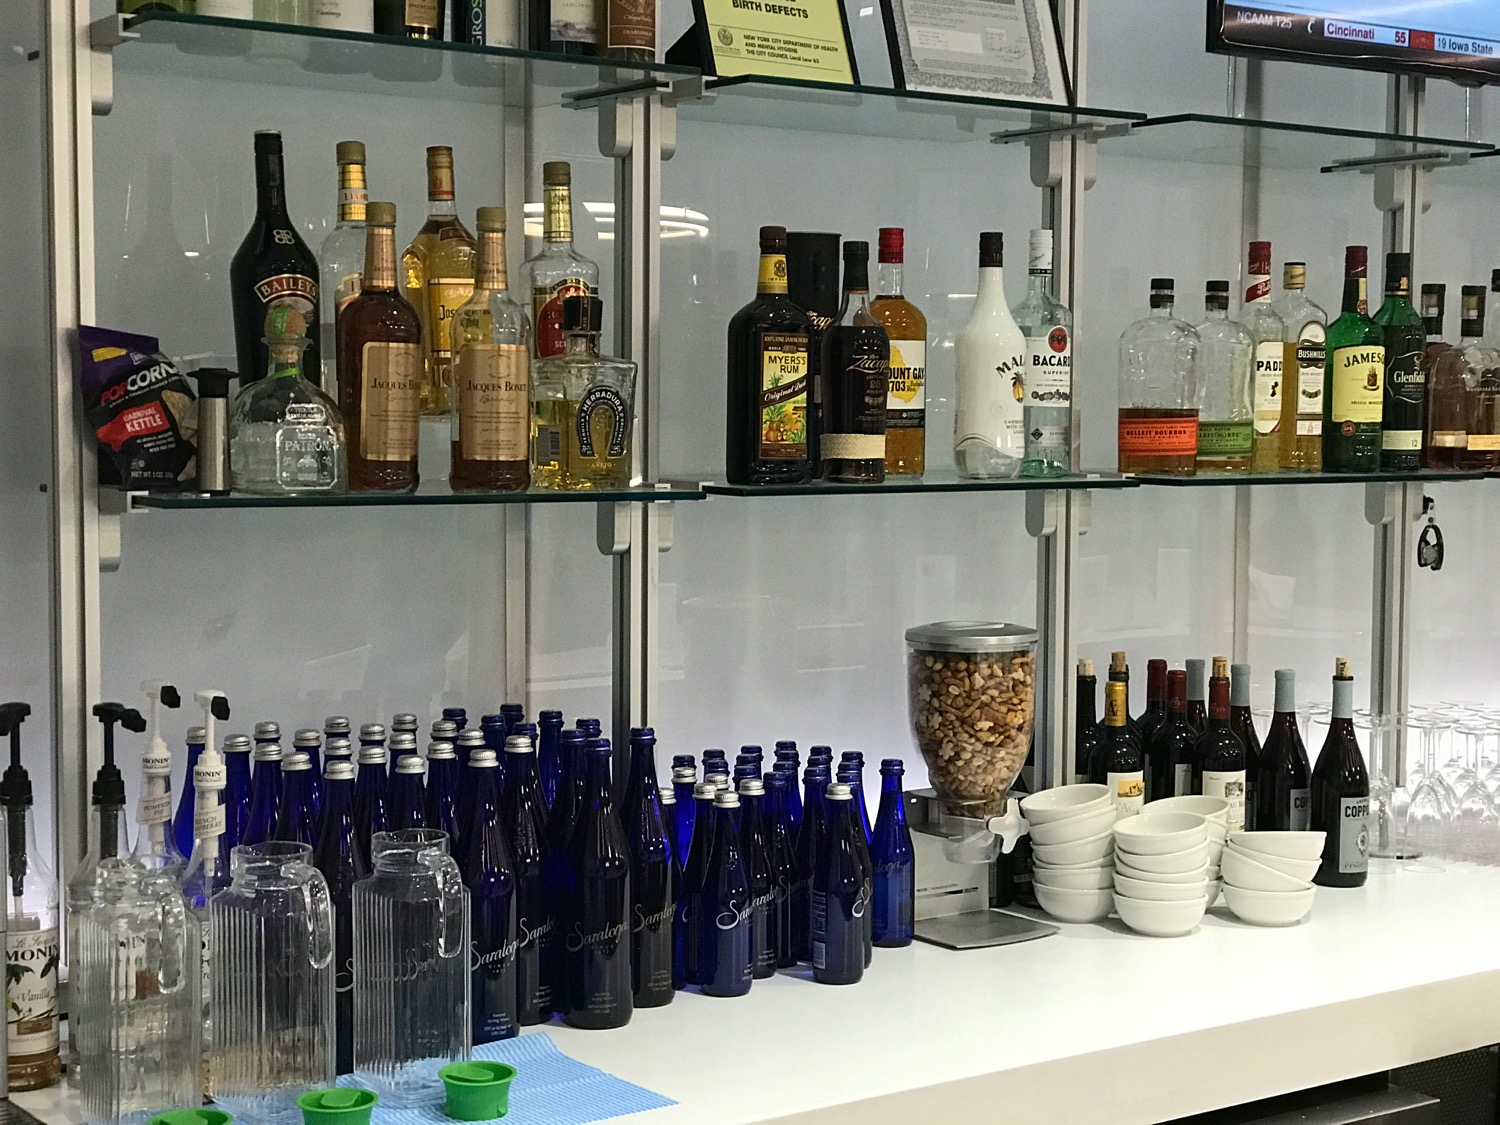 a shelf with bottles and glasses